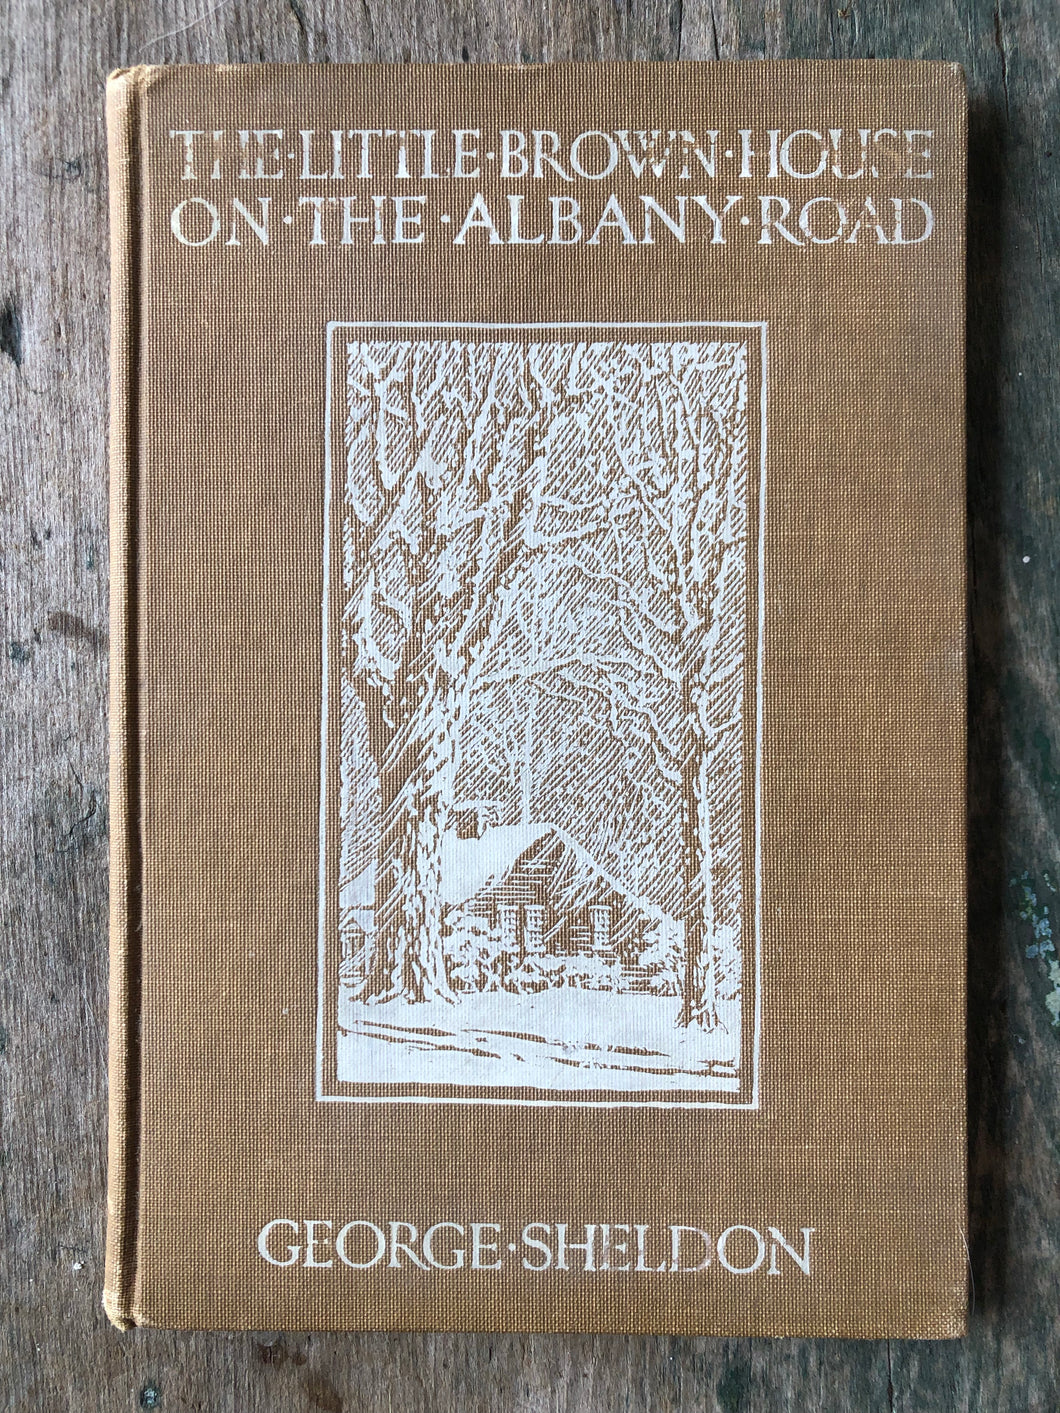 The Little Brown House on the Albany Road. by George Sheldon